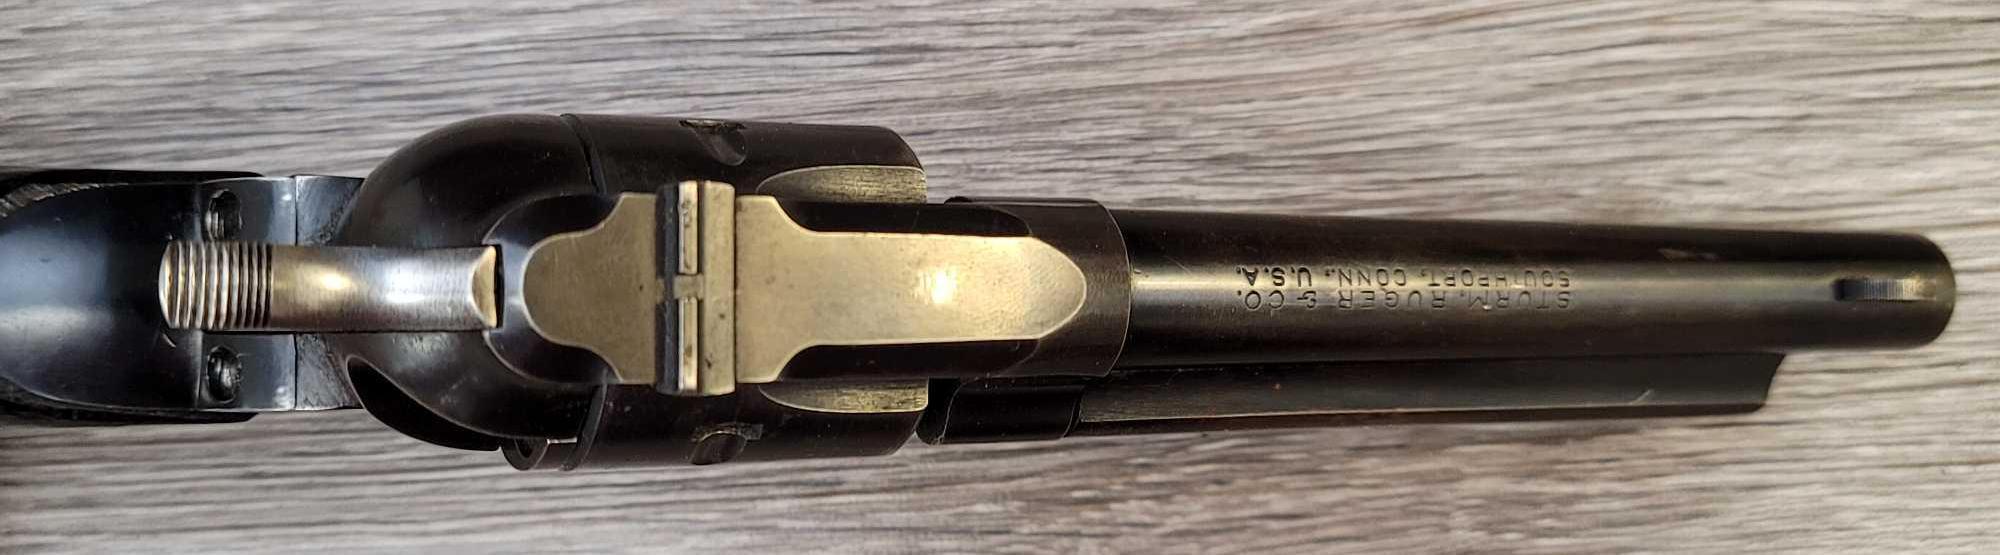 EARLY RUGER SINGLE-SIX .22 LR SINGLE-ACTION REVOLVER